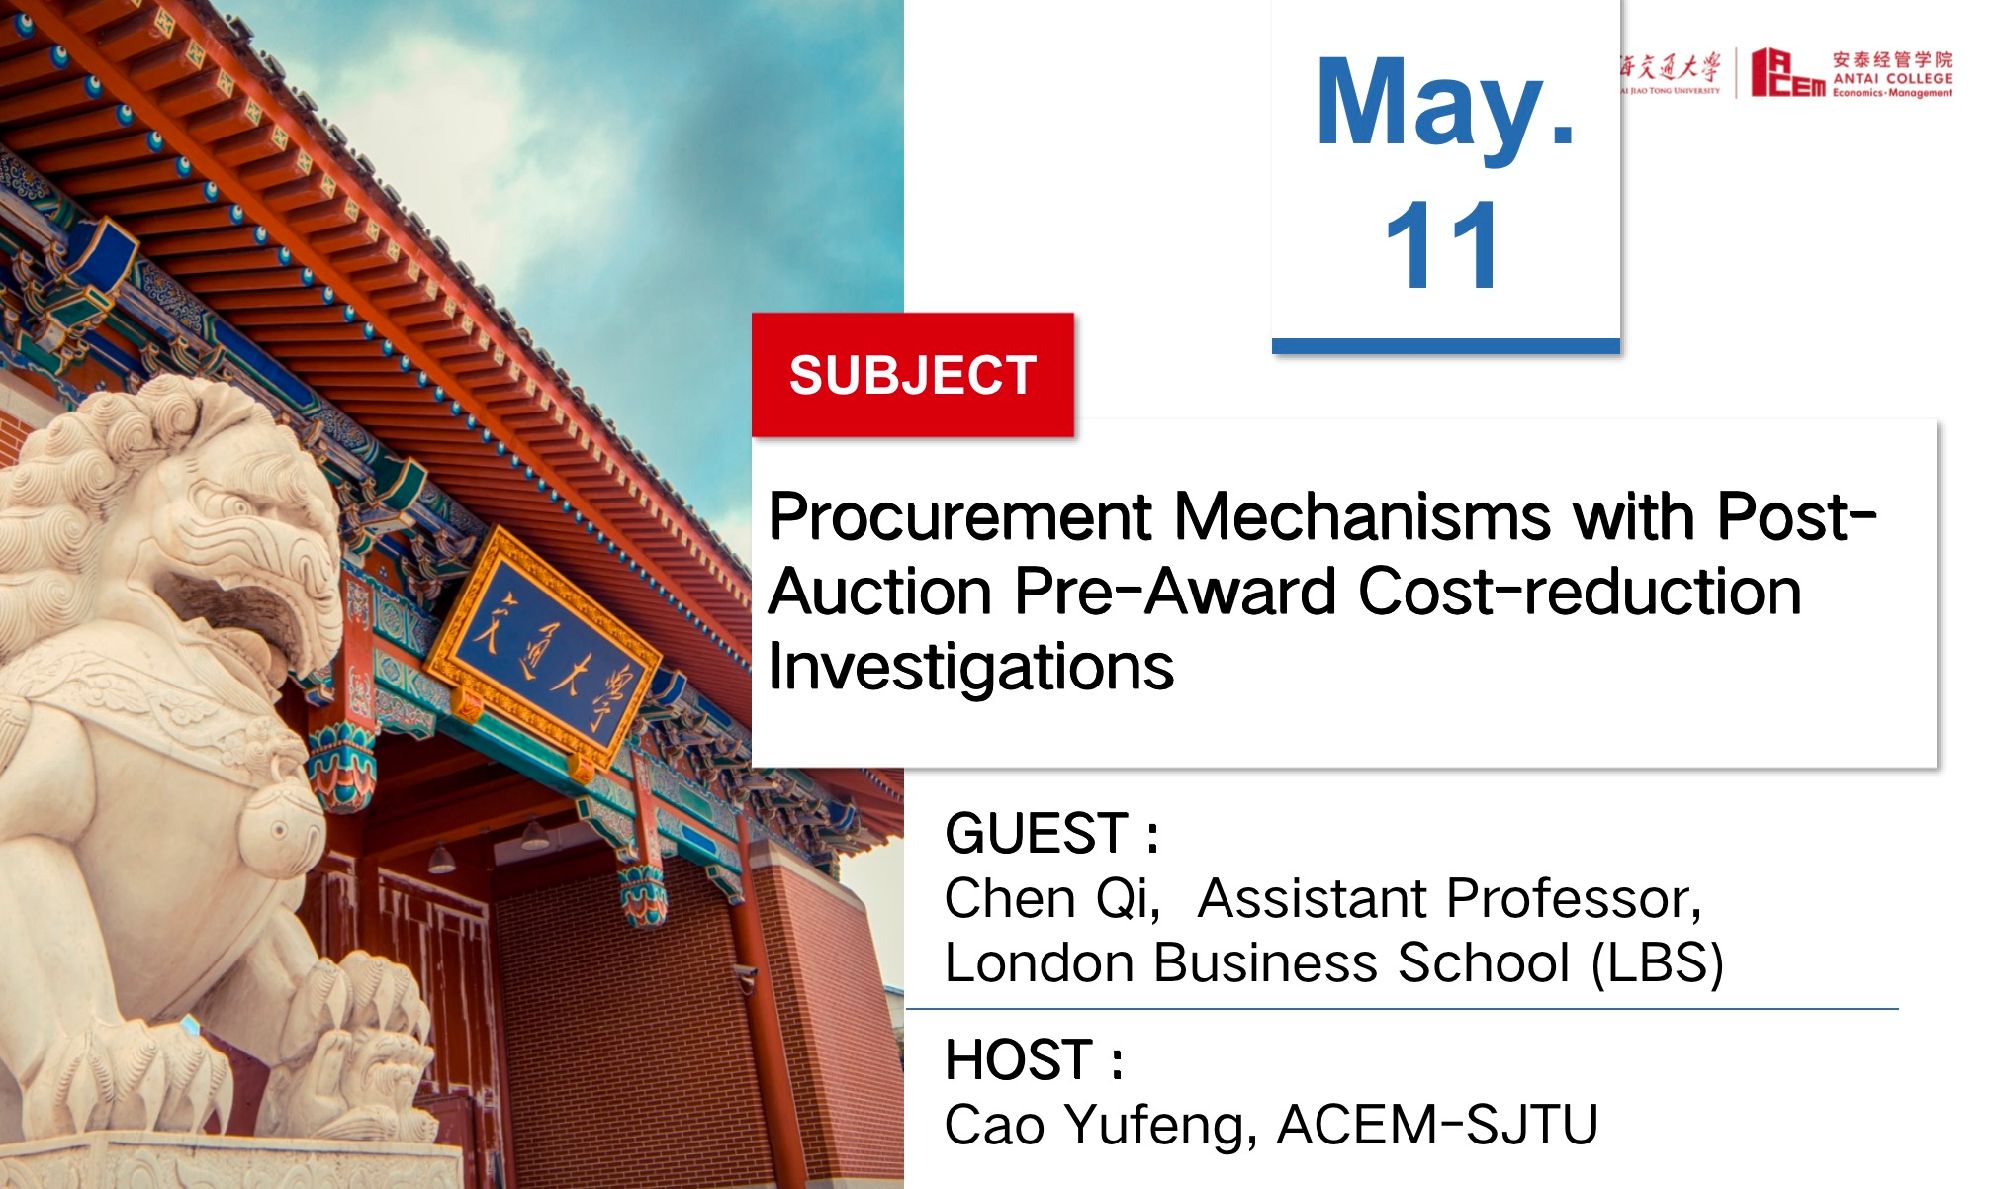 Procurement Mechanisms with Post-Auction Pre-Award Cost-reduction Investigations